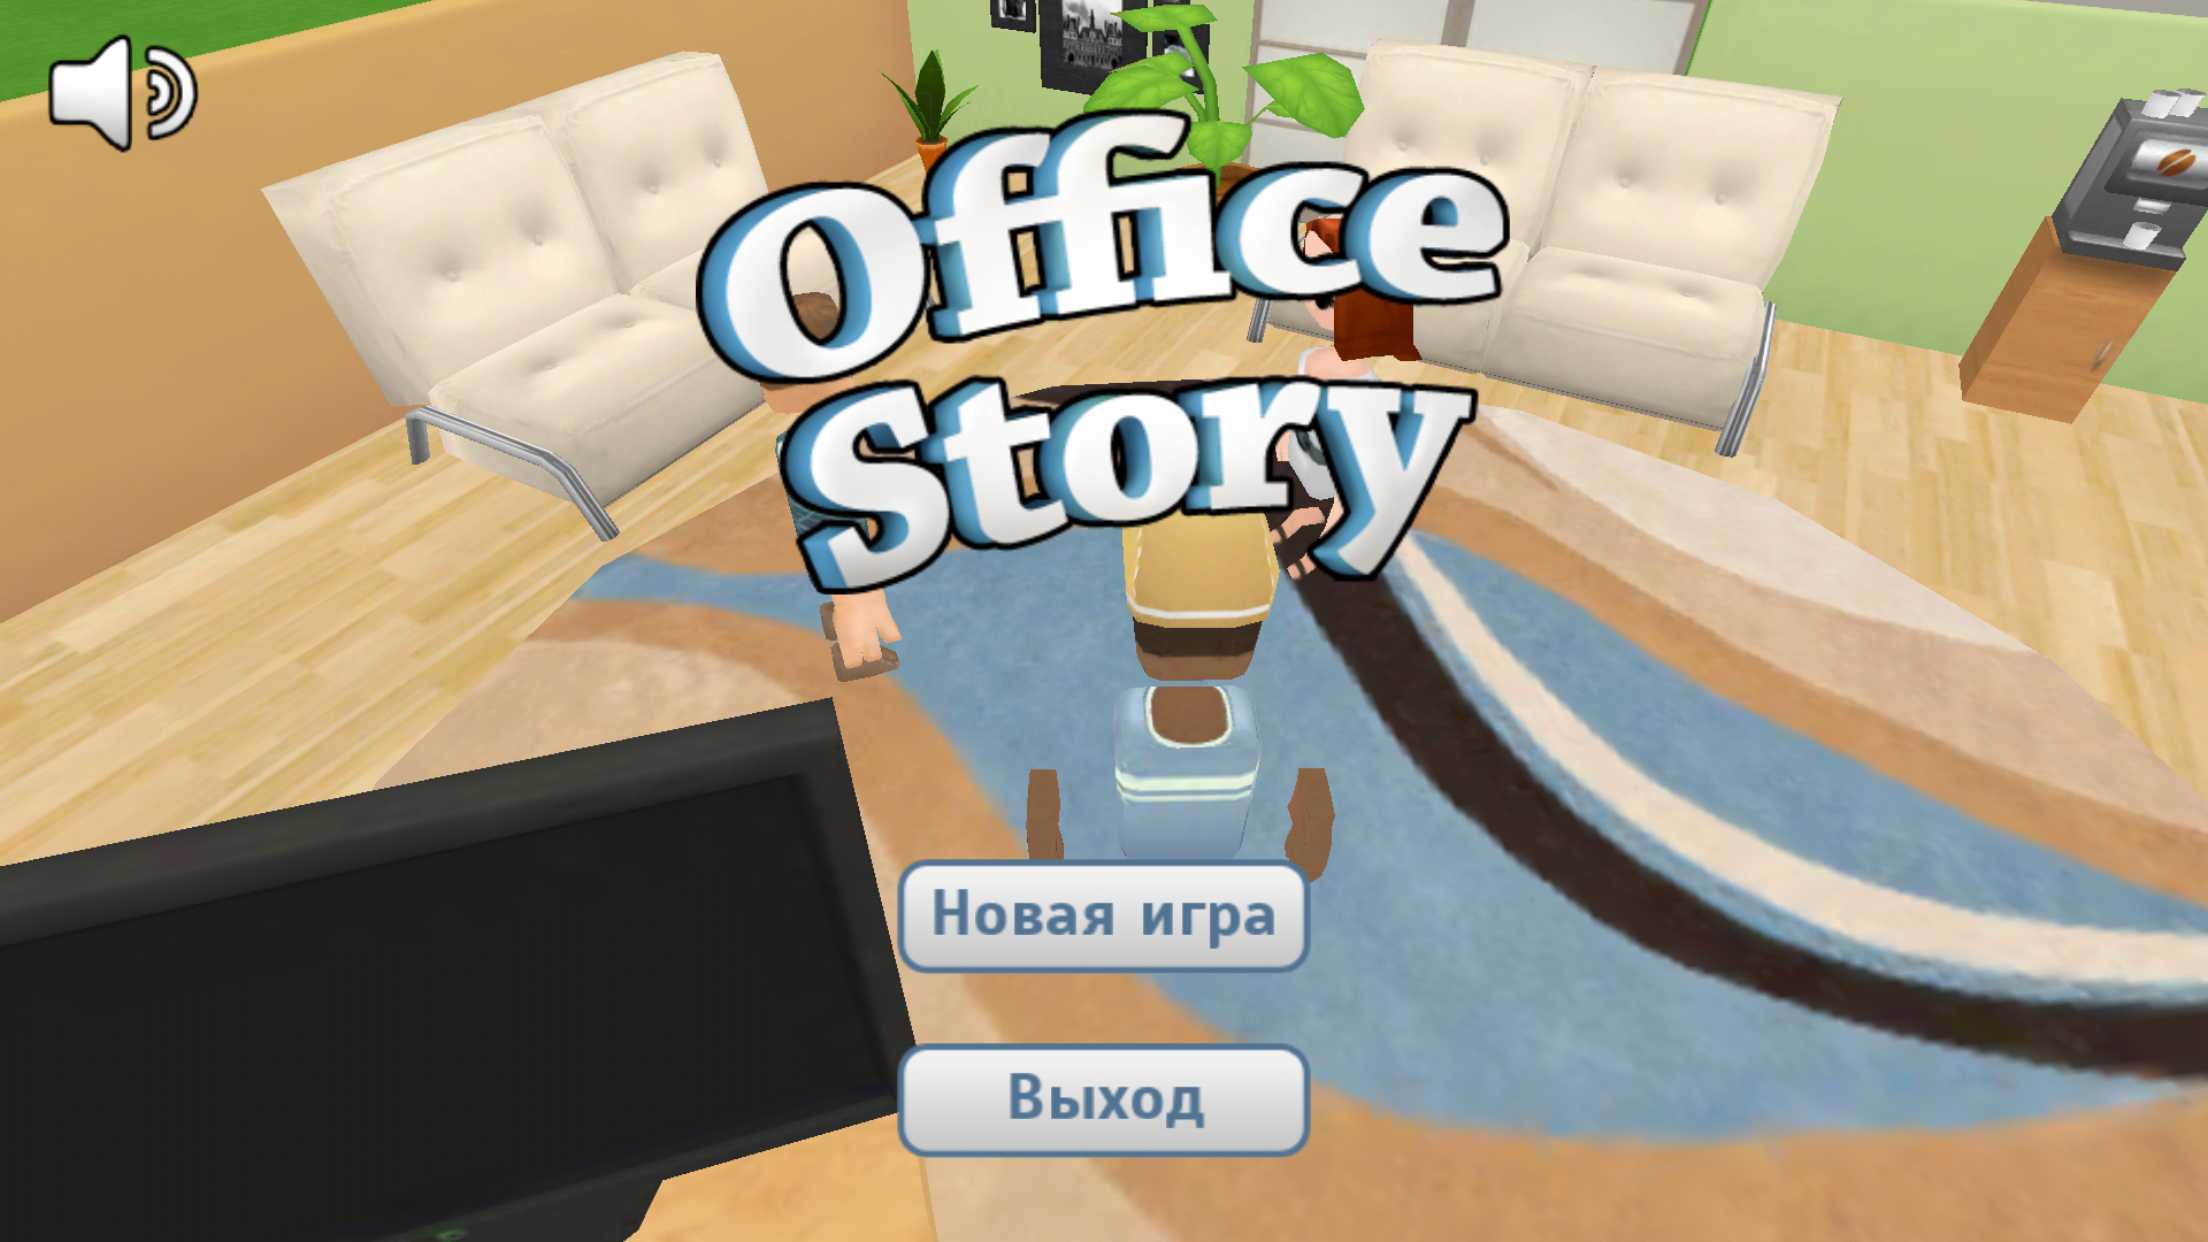 That new story. Игра Office story. Андроид Office story. Continue the story game. IOS Hack.